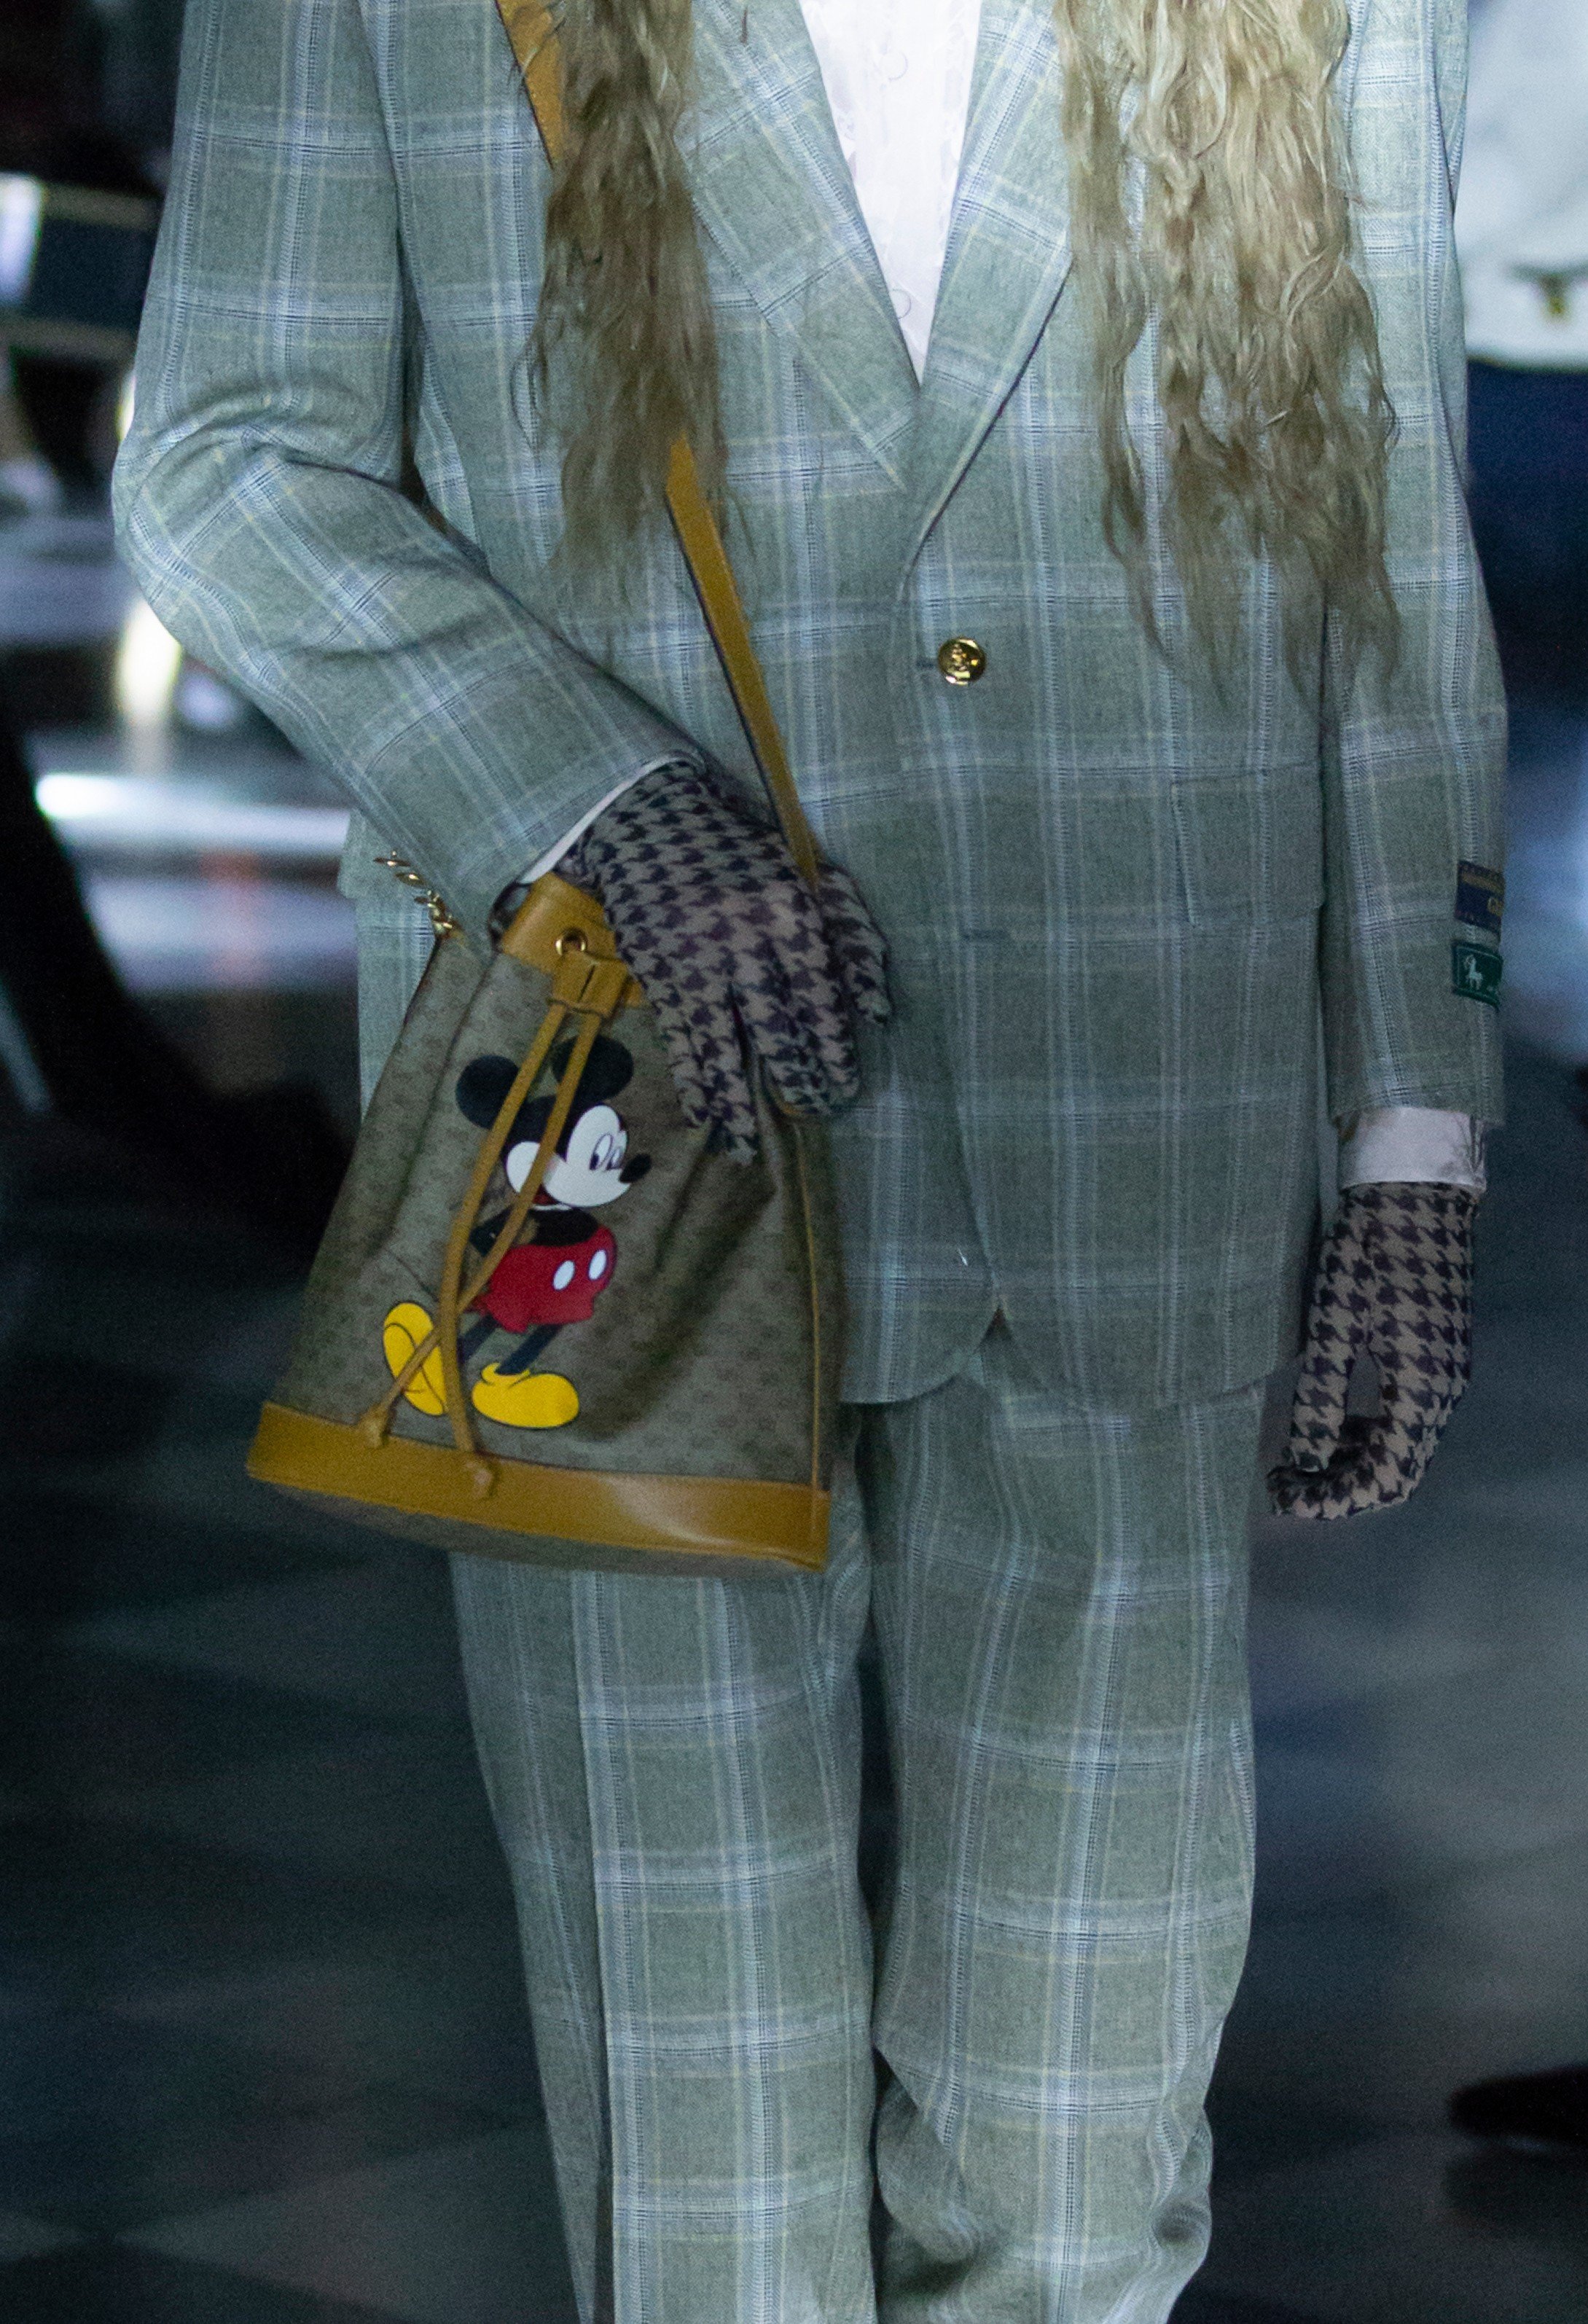 Gucci's Cruise 2020 collection takes 